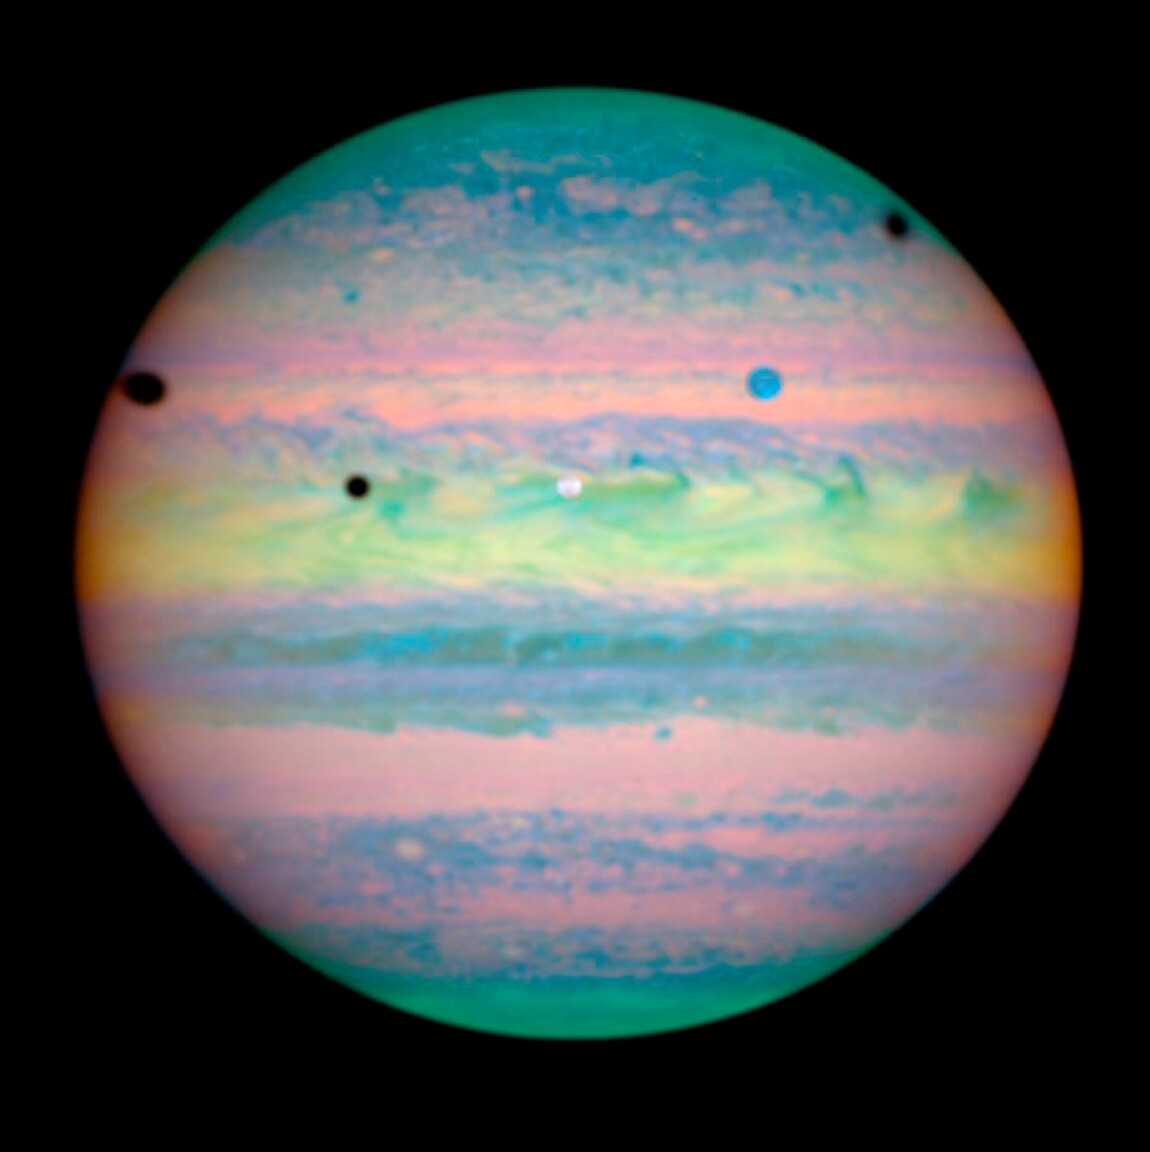 Lunar encounter on Jupiter (Io, Ganymede, and Callisto, in eclipse)
Image courtesy by NASA/Hubble, 2004
